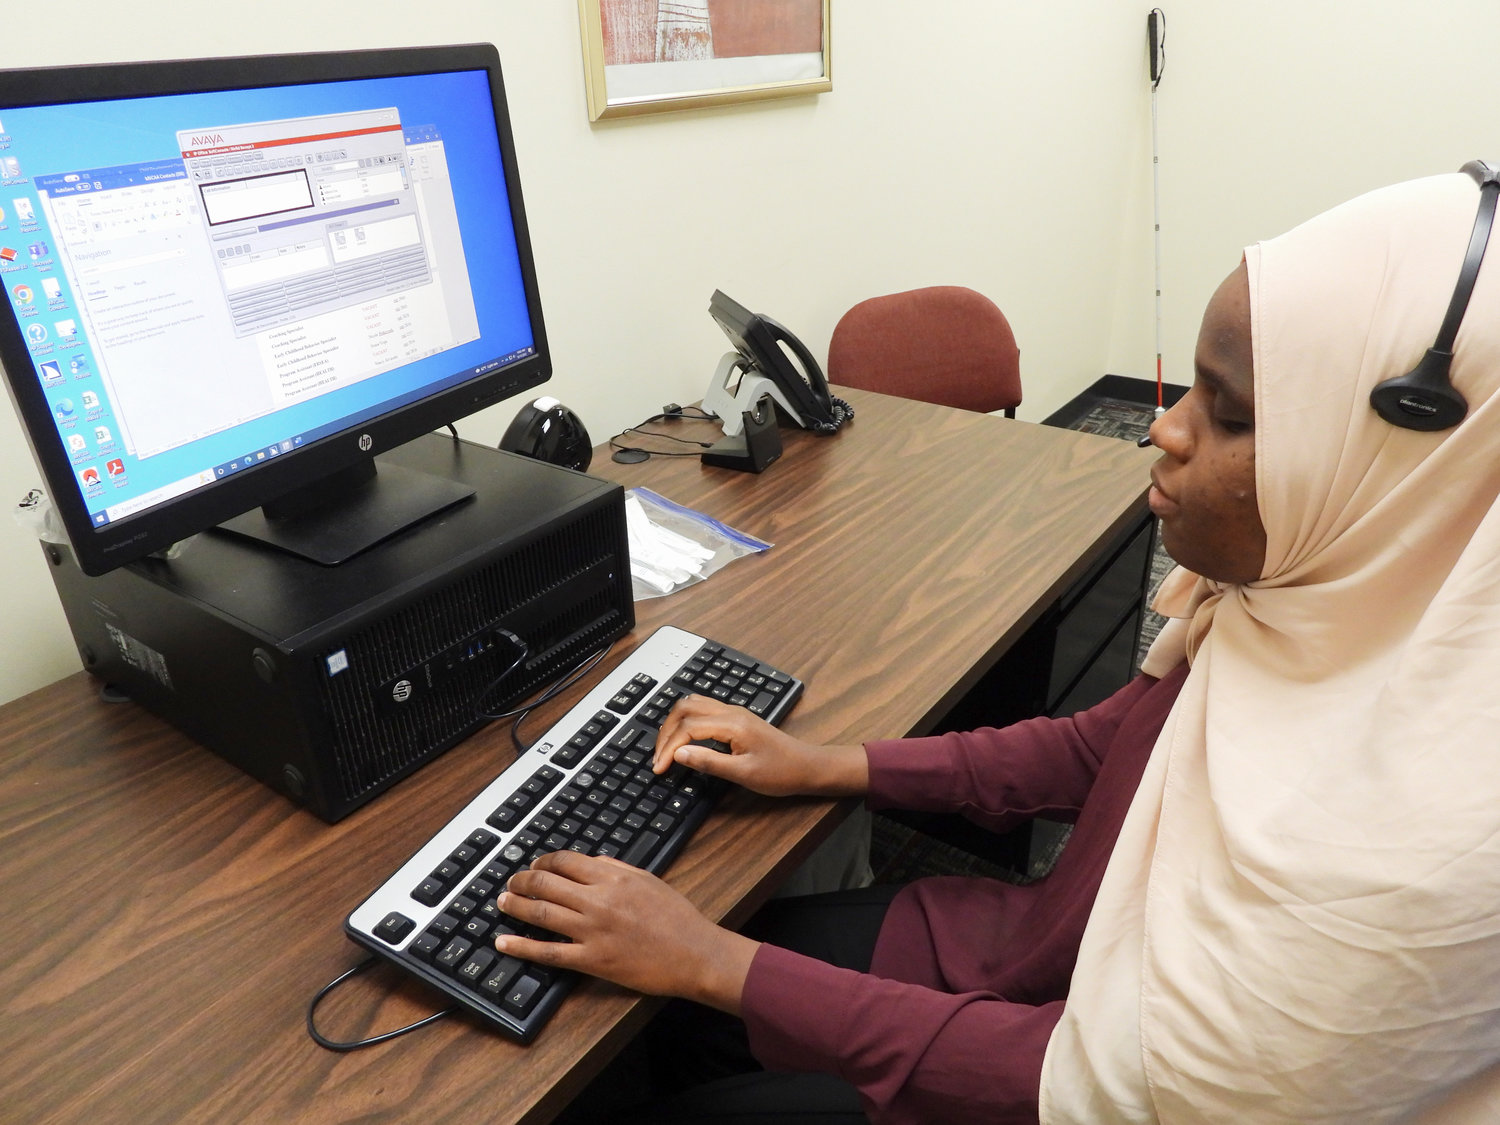 Makka Djouma, a Sudanese immigrant refugee who’s blind, works at the Mohawk Valley Community Action Agency in Utica as a telephone operator and receptionist.(Sentinel photo by Charles Pritchard)